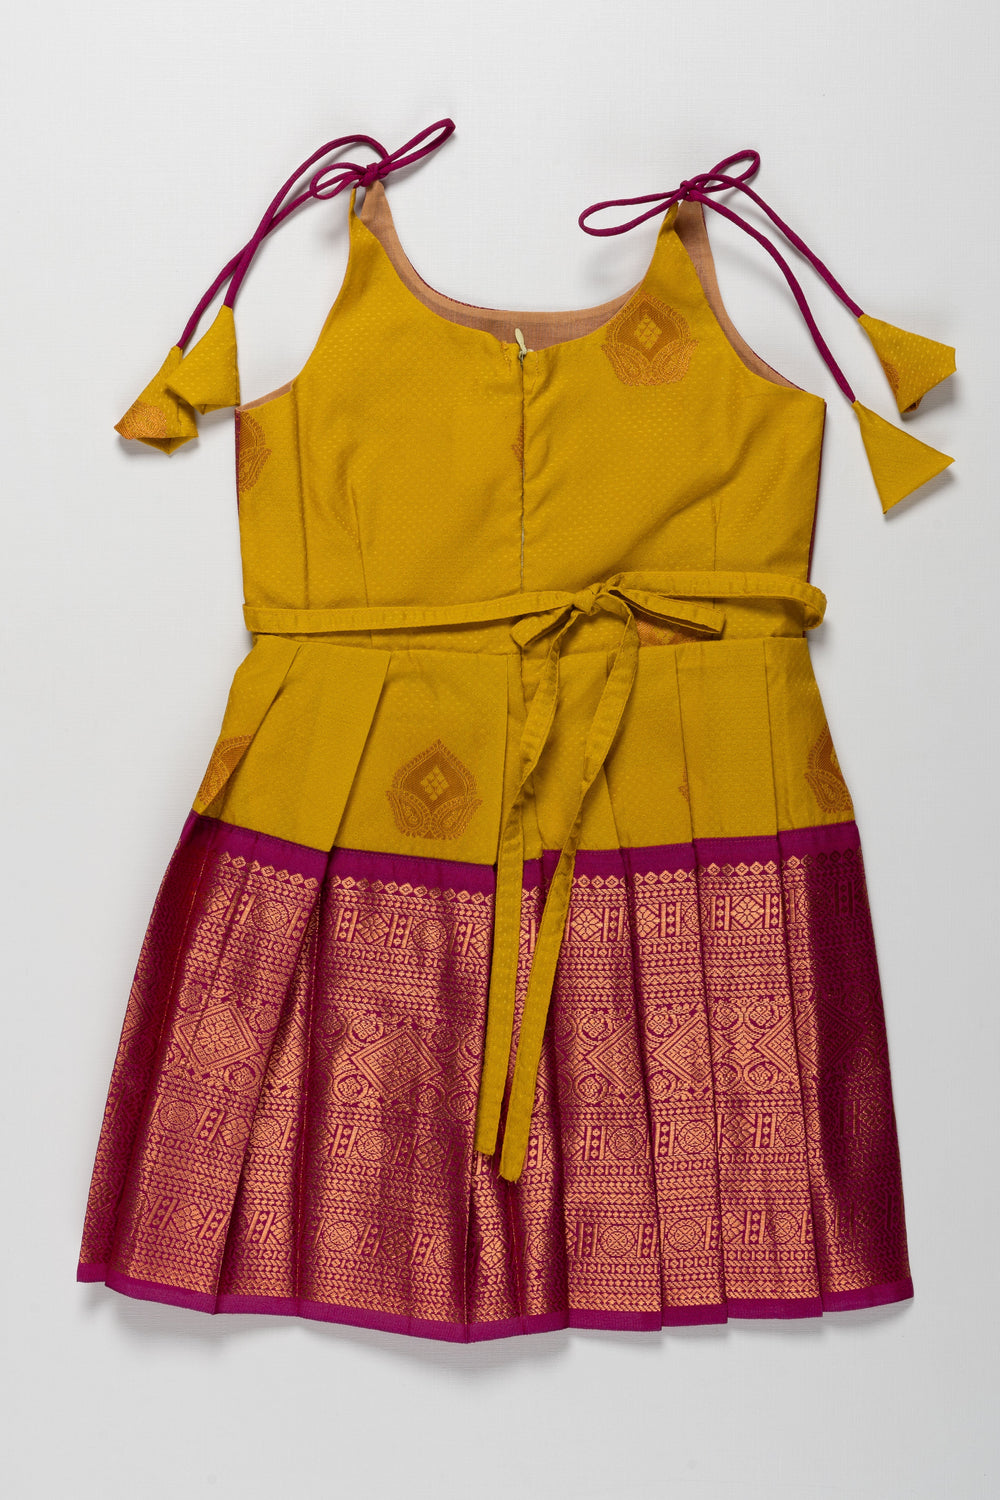 The Nesavu Tie-up Frock Radiant Silk Knot-Tie Frock for Namakarana and Karnavedha: Diverse and Bold Color Combinations Nesavu Stylish Maroon and Gold Silk Dresses for Kids | Unique Party Wear with Adjustable Ties | The Nesavu